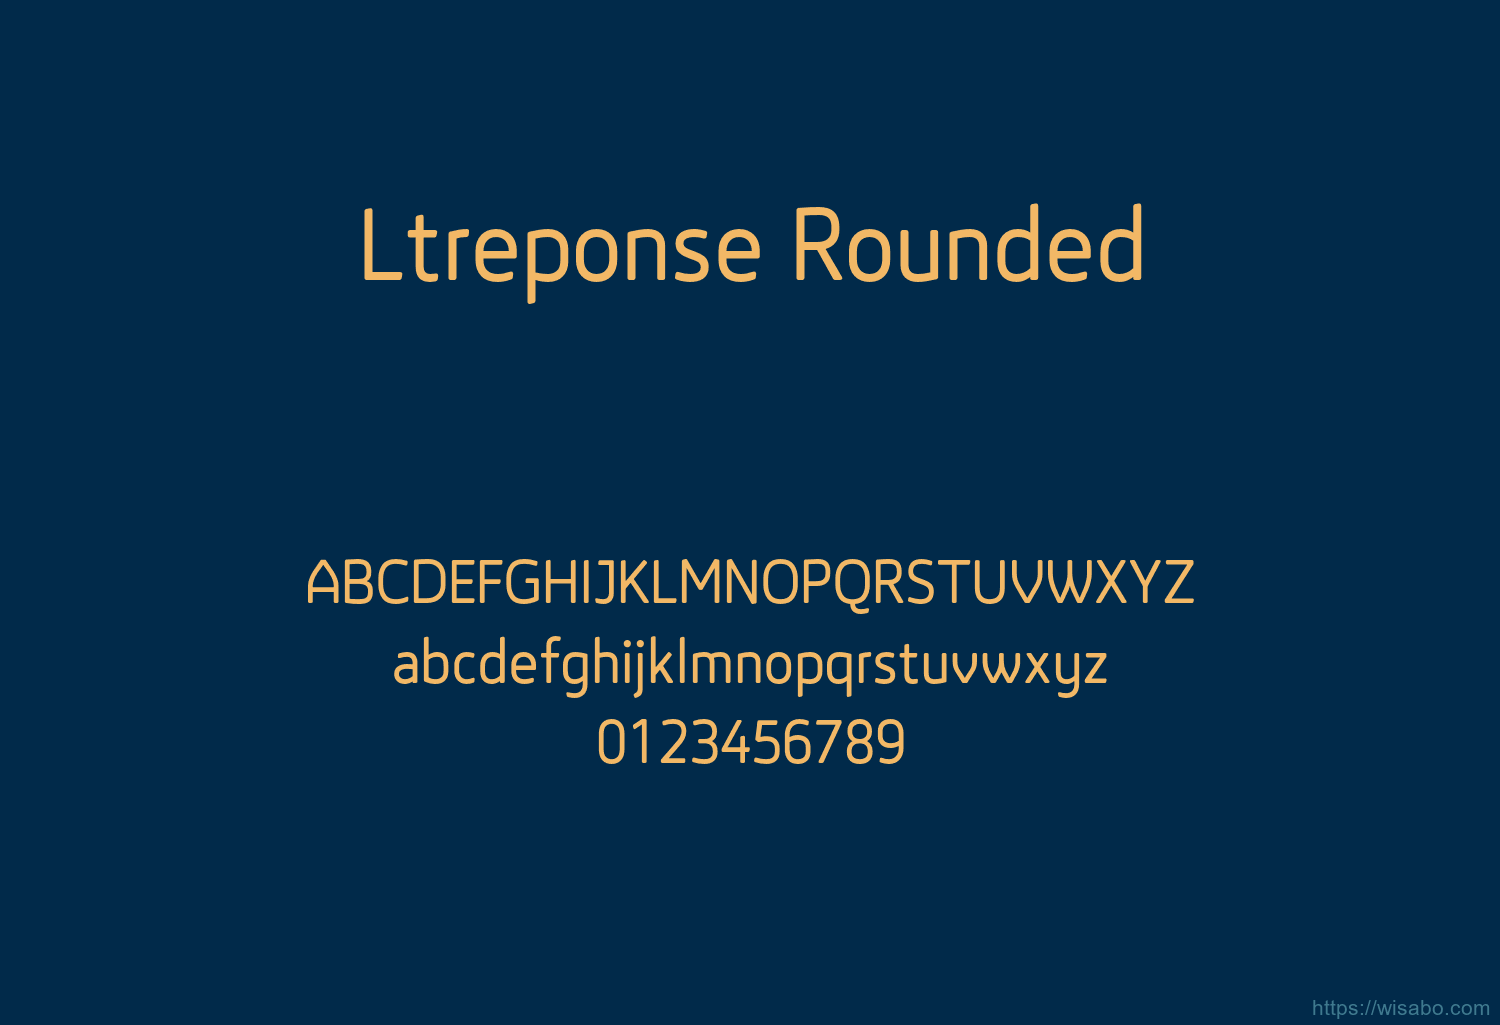 Ltreponse Rounded